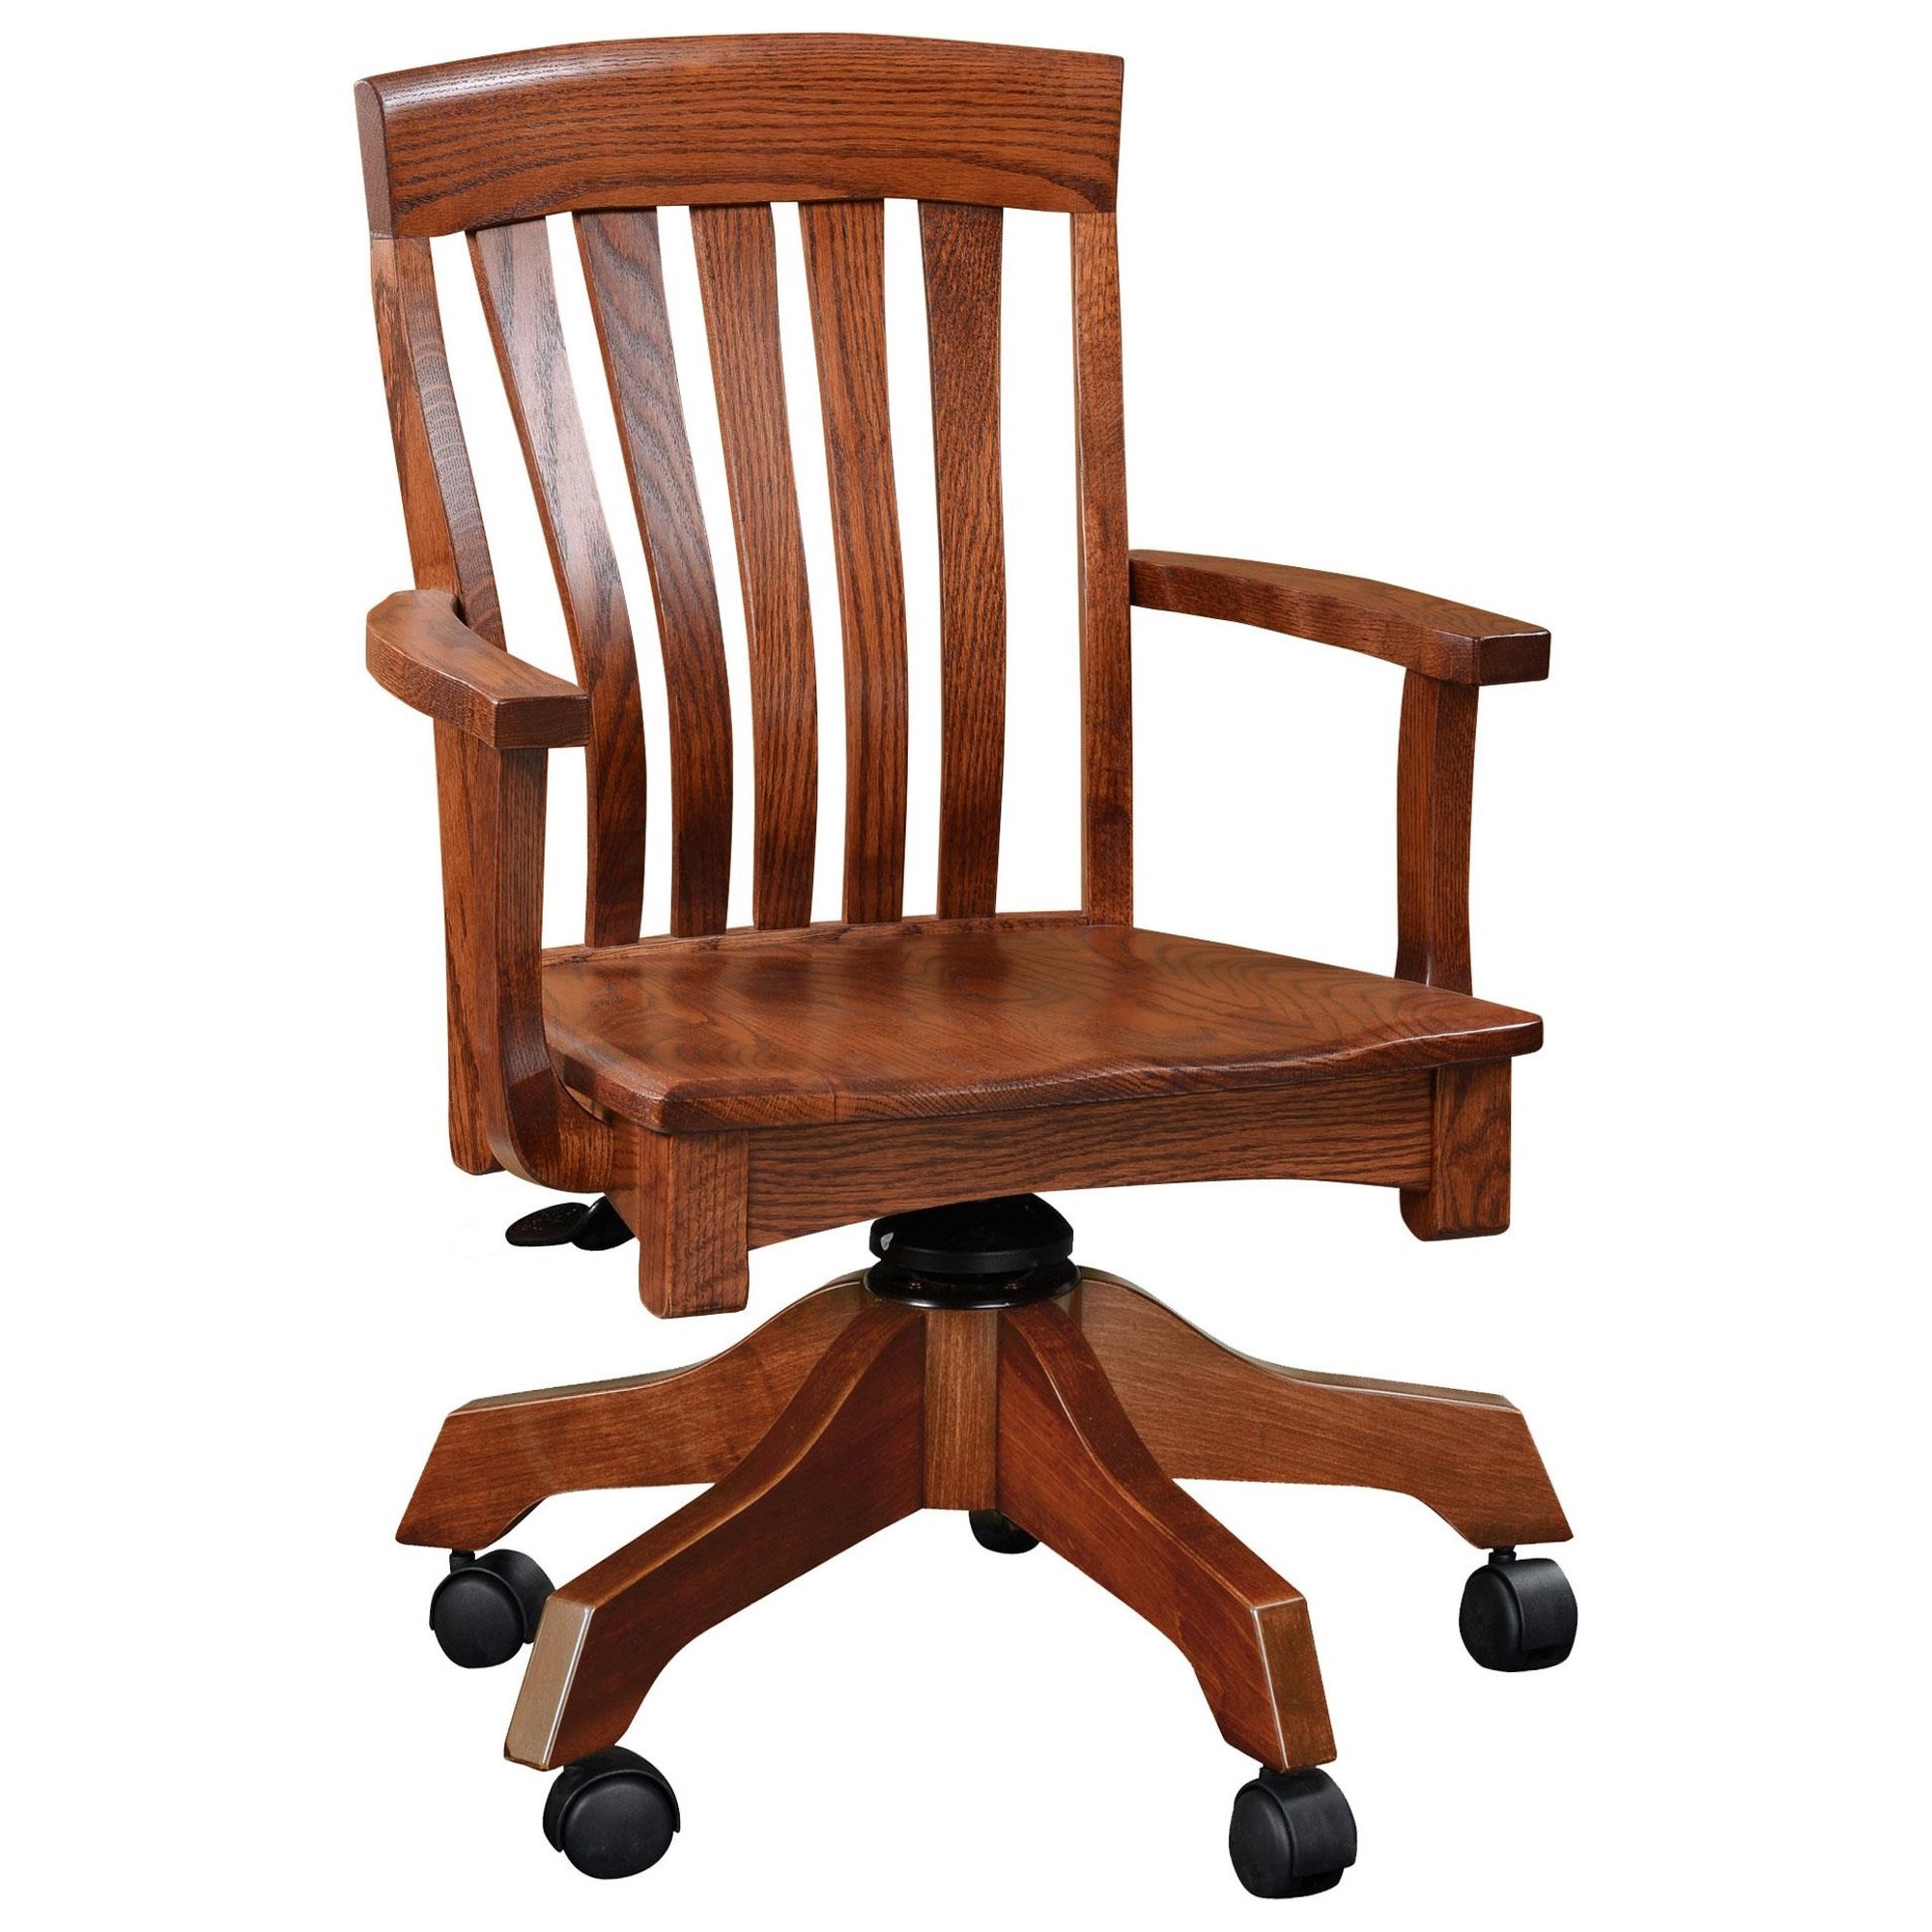 Wengerd Wood Products Richland Richland-ADC Customizable Solid Wood  Executive Desk Chair, Wayside Furniture & Mattress